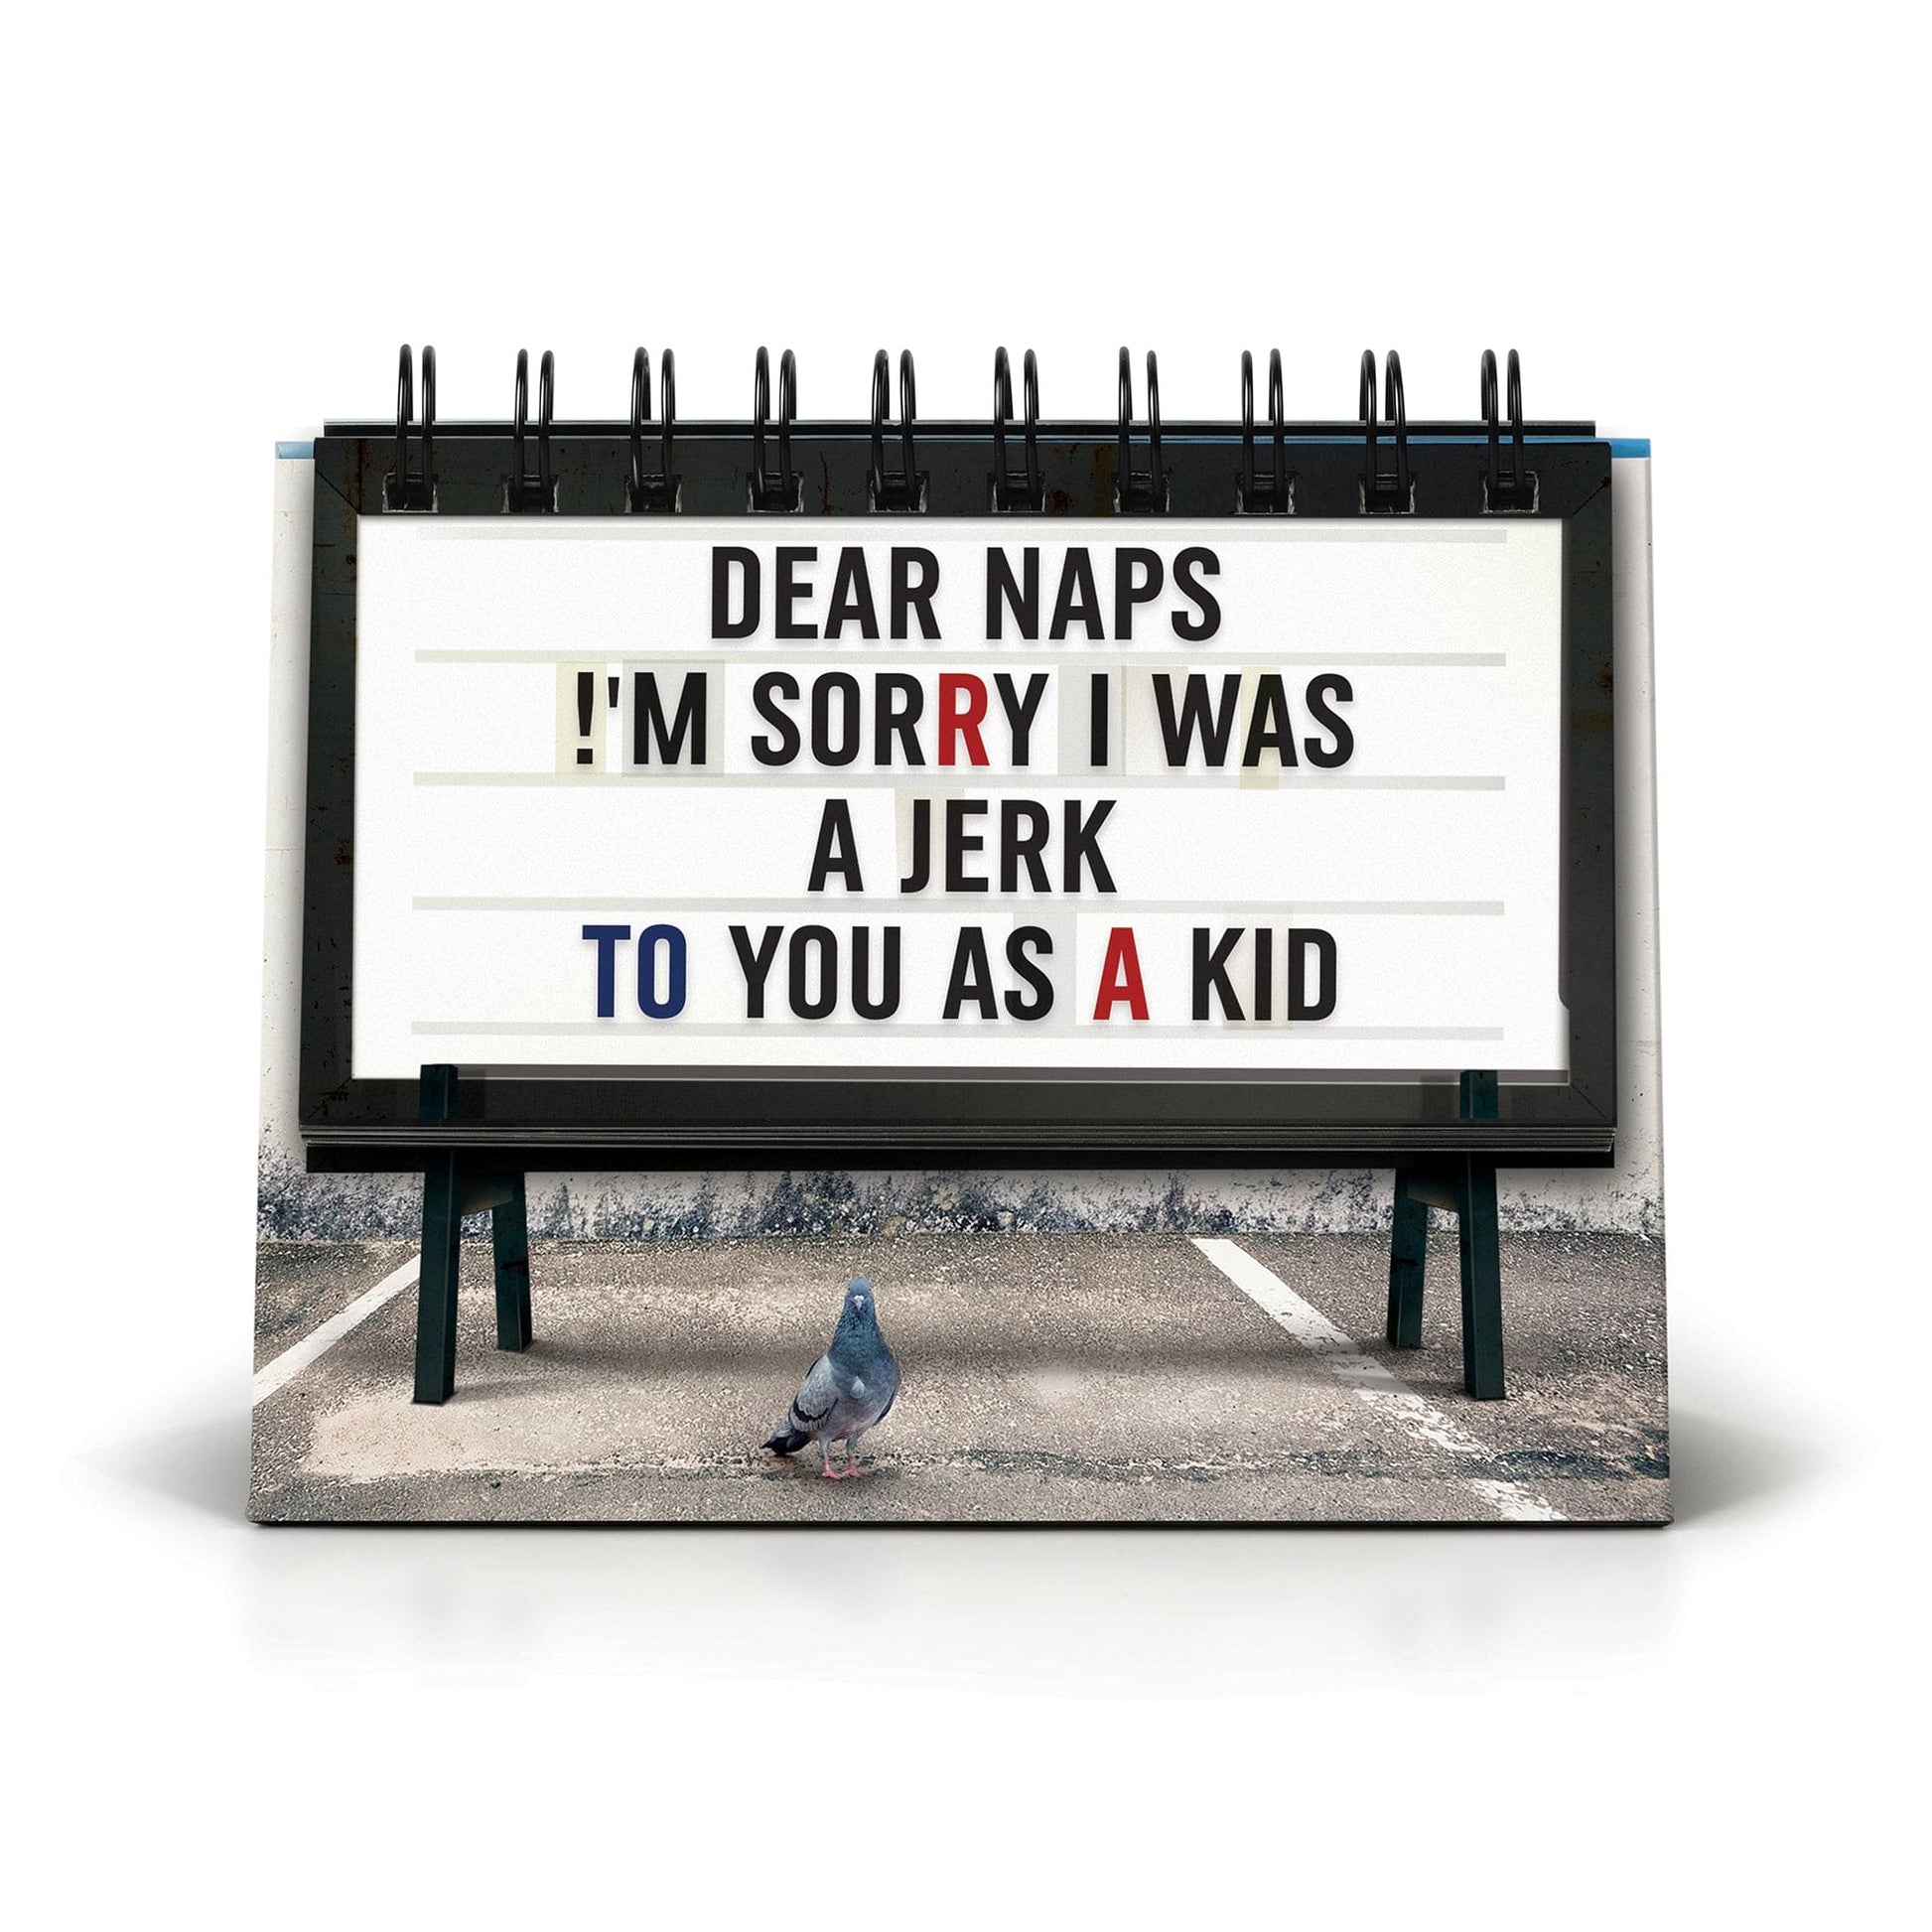 daily marquee flipped to sign reading "dear naps i'm sorry i was a jerk to you as a kid"